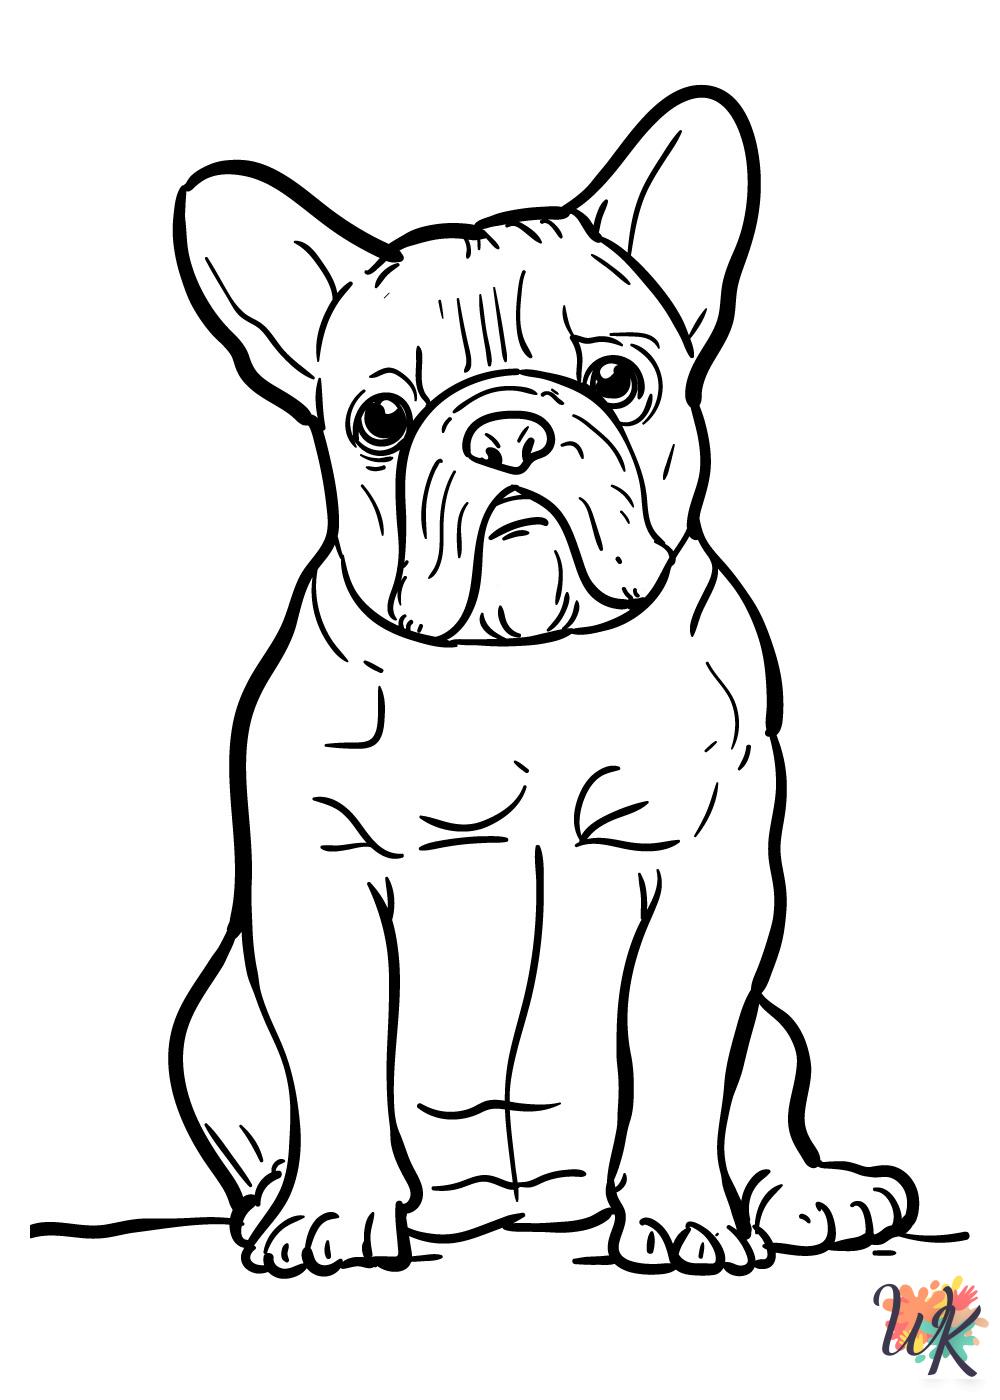 Dogs ornament coloring pages